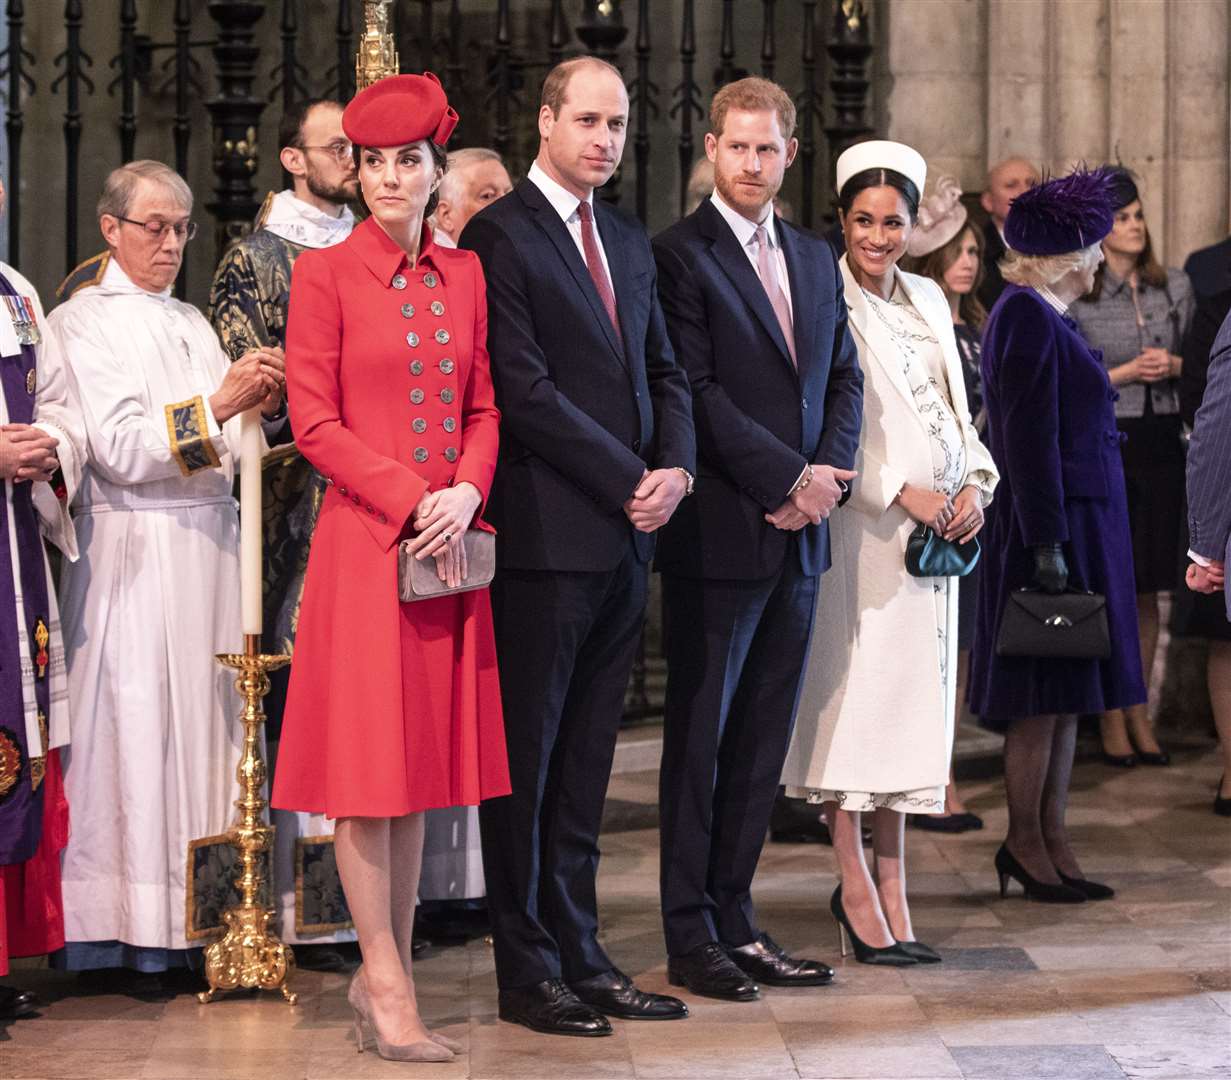 The Duke and Duchess of Cambridge with the Duke and Duchess of Sussex at a Commonwealth Service at Westminster Abbey (Richard Pohle/The Times/PA)